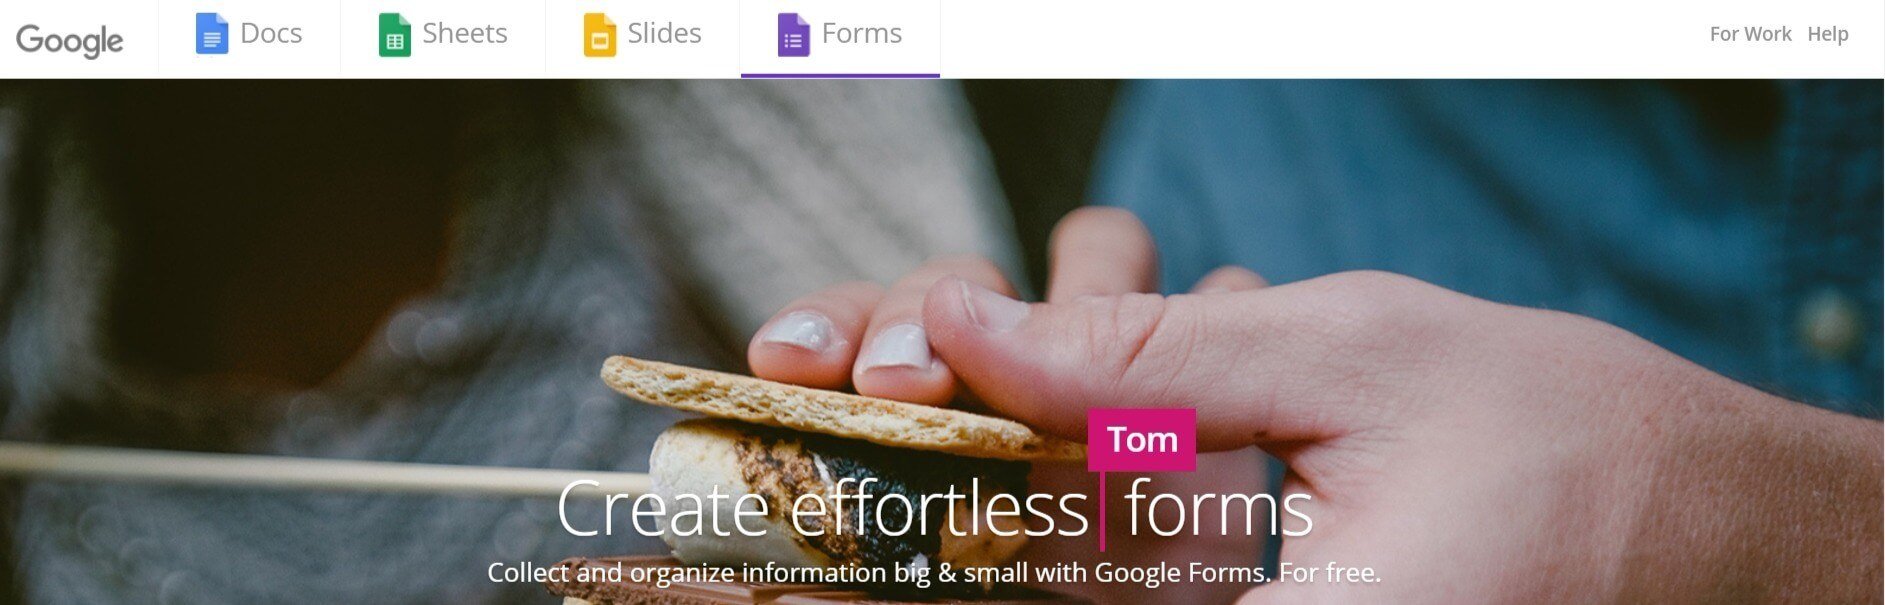 The Google Forms homepage